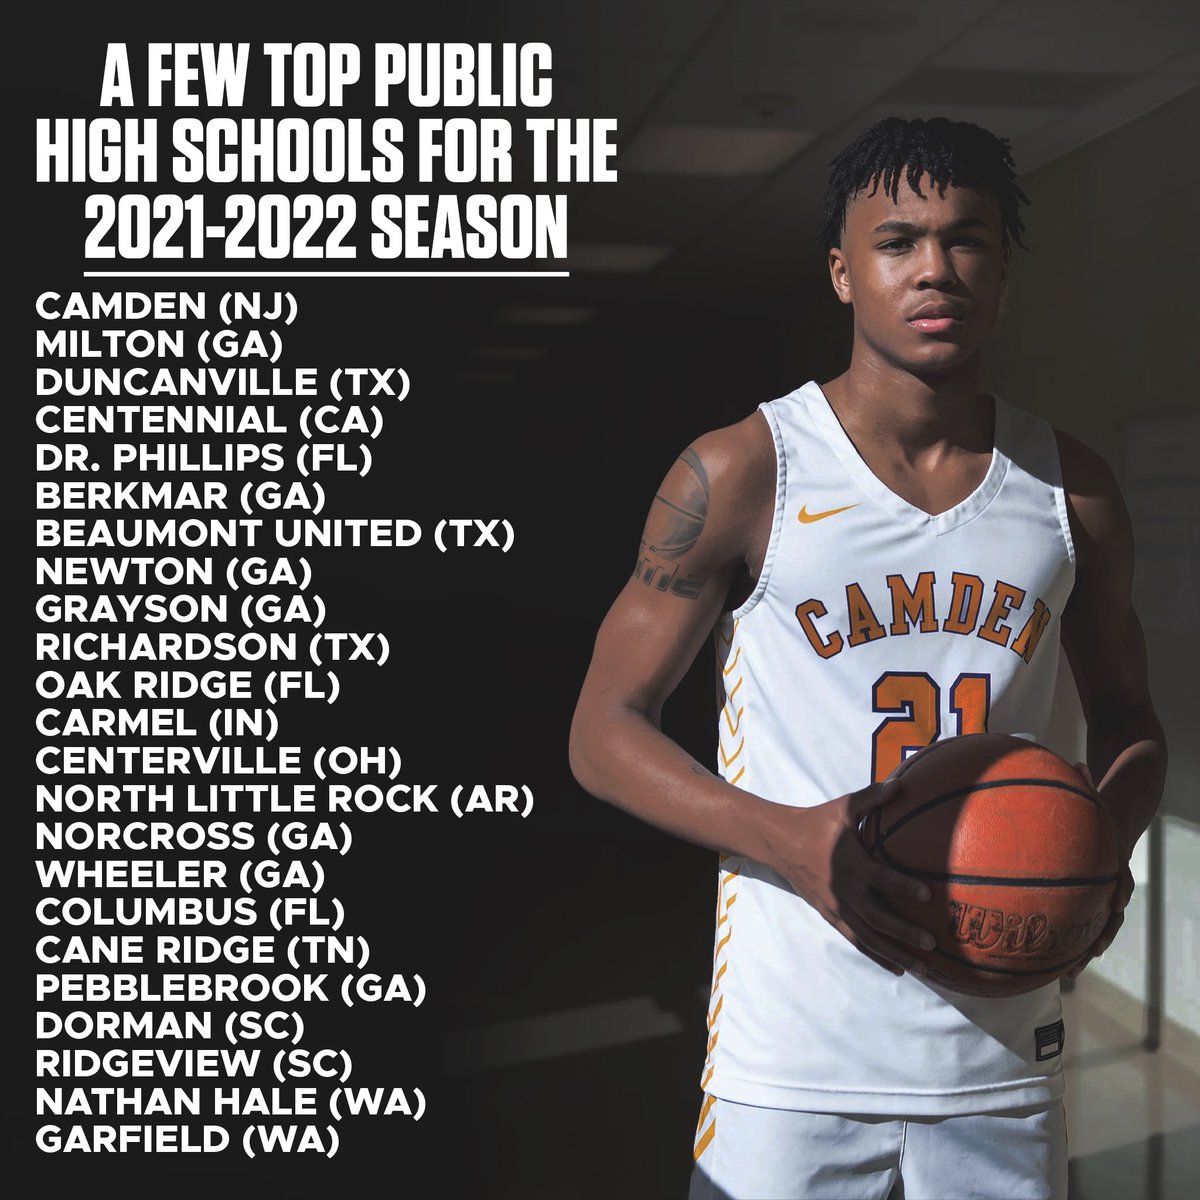 A list of a few of the top public schools in the country coming into the 2021-2022 high school season. Camden (NJ), Milton (GA), Duncanville (TX), and Centennial (CA) are the only four currently ranked in the preseason top-25 nationally as of now.